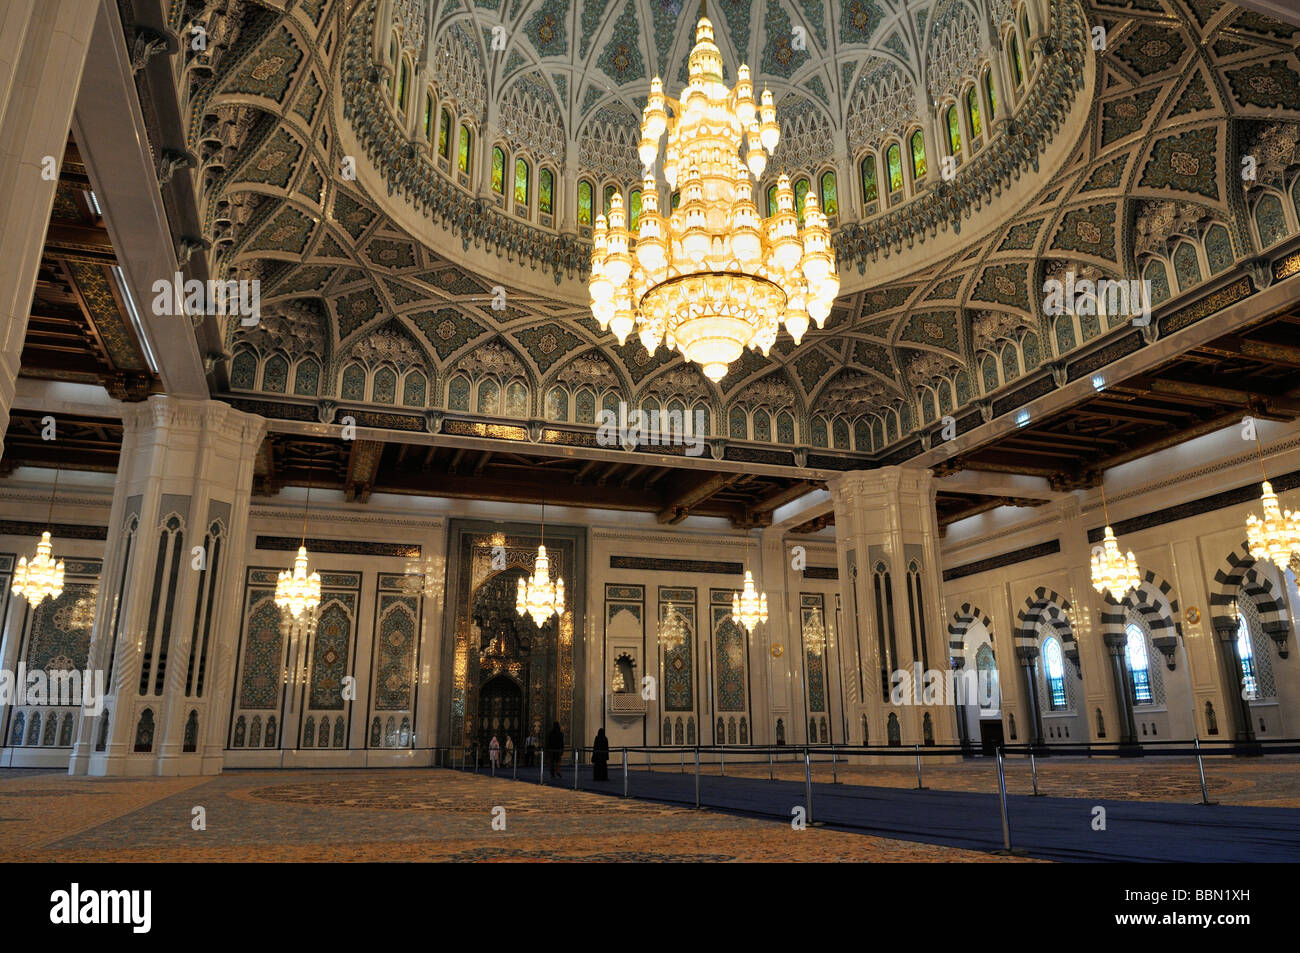 Central prayer hall at the Sultan Qaboos Grand Mosque, Muscat, Sultanate of Oman, Arabia, Middle East Stock Photo